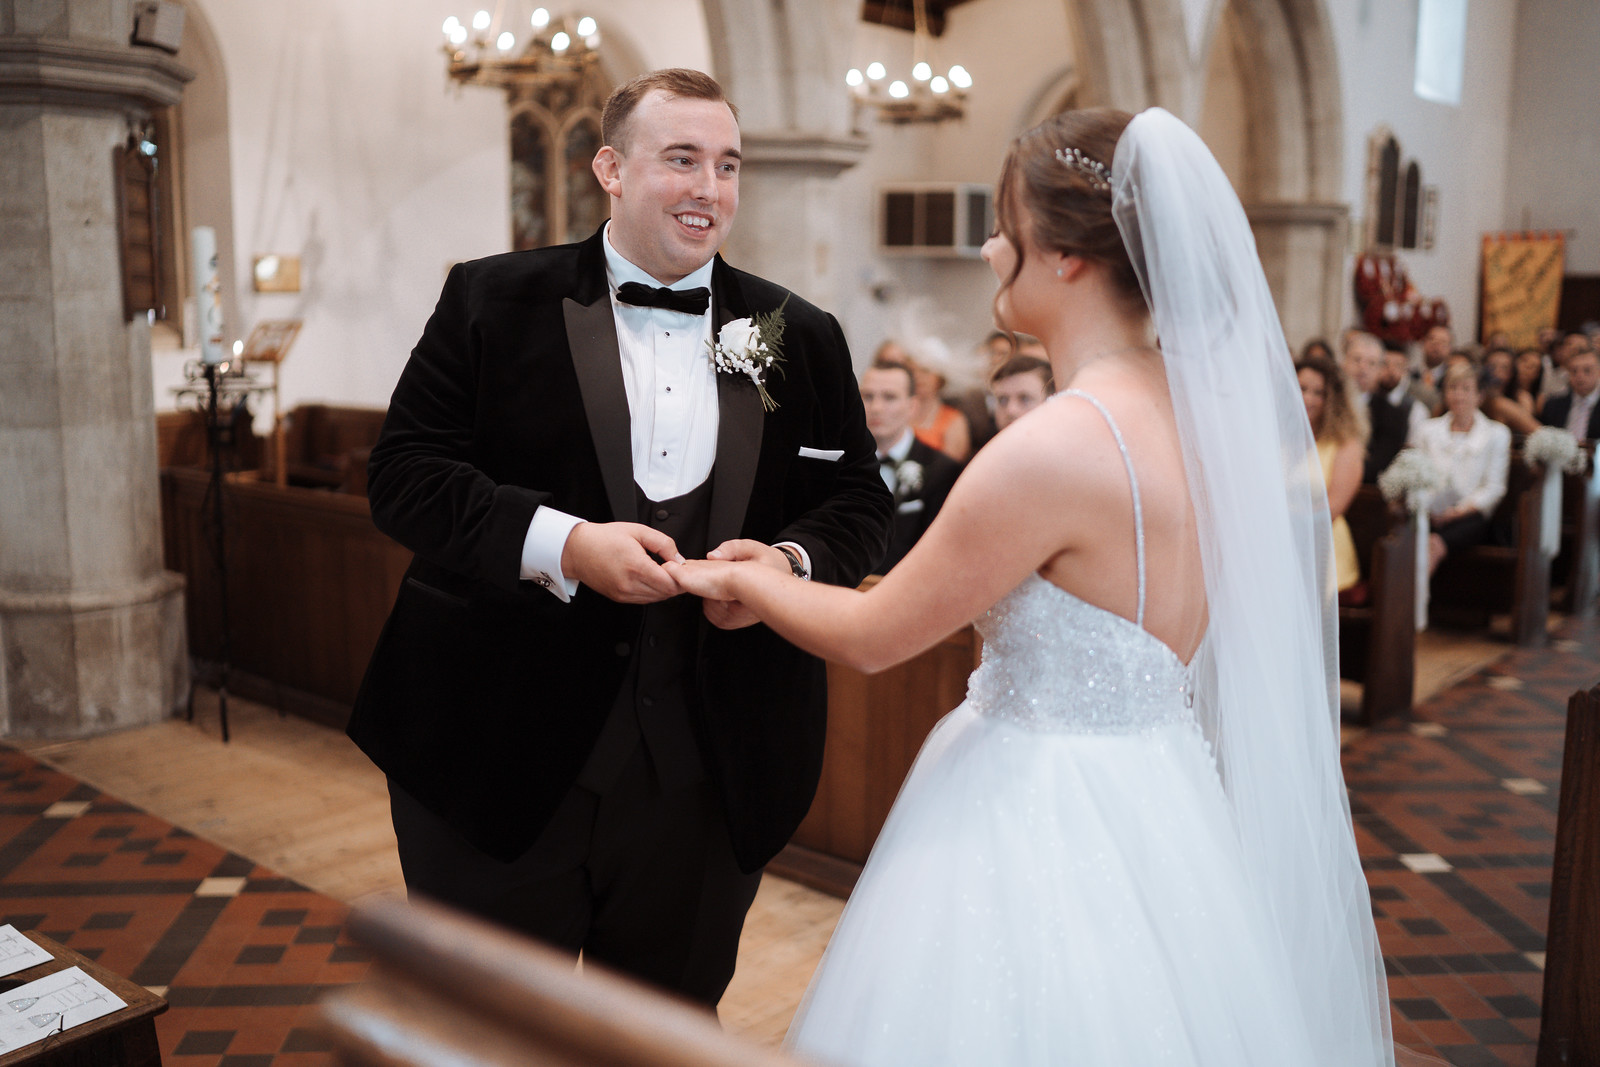 Groom smiles at bride as her ring is placed on her finger